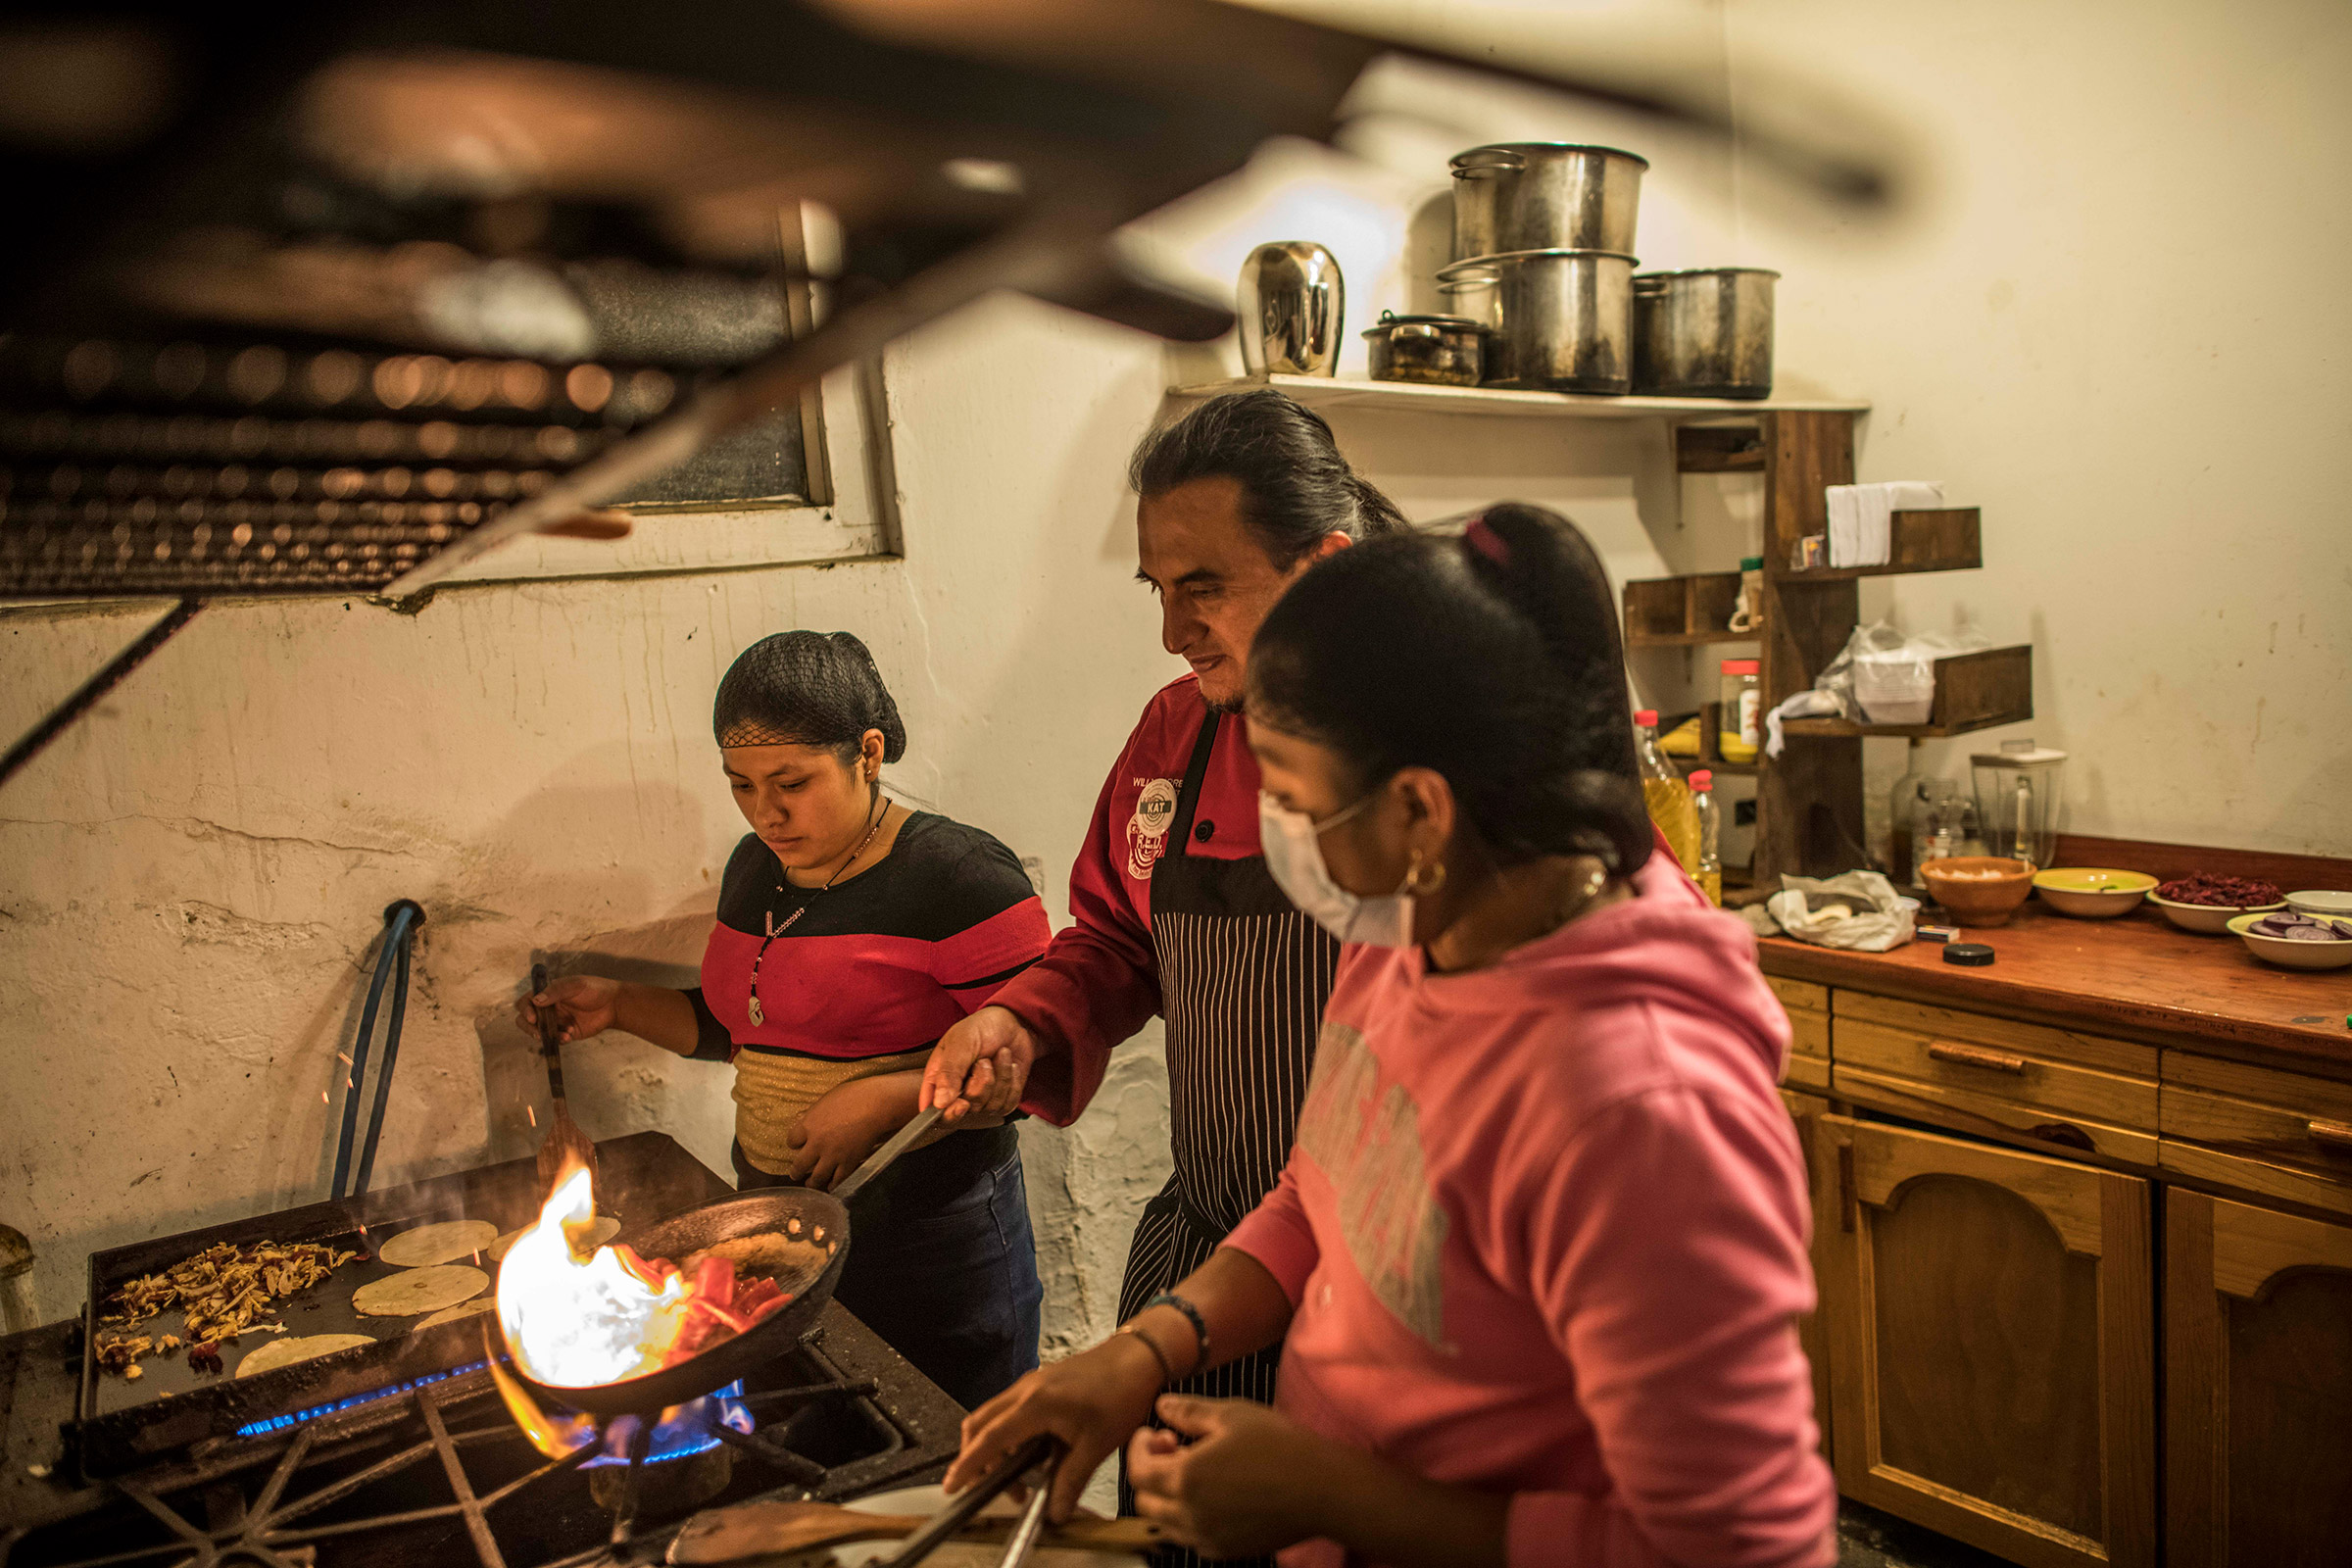 Chef Willy Barreno (center) in the kitchen of his restaurant La Red. (Daniele Volpe for TIME)